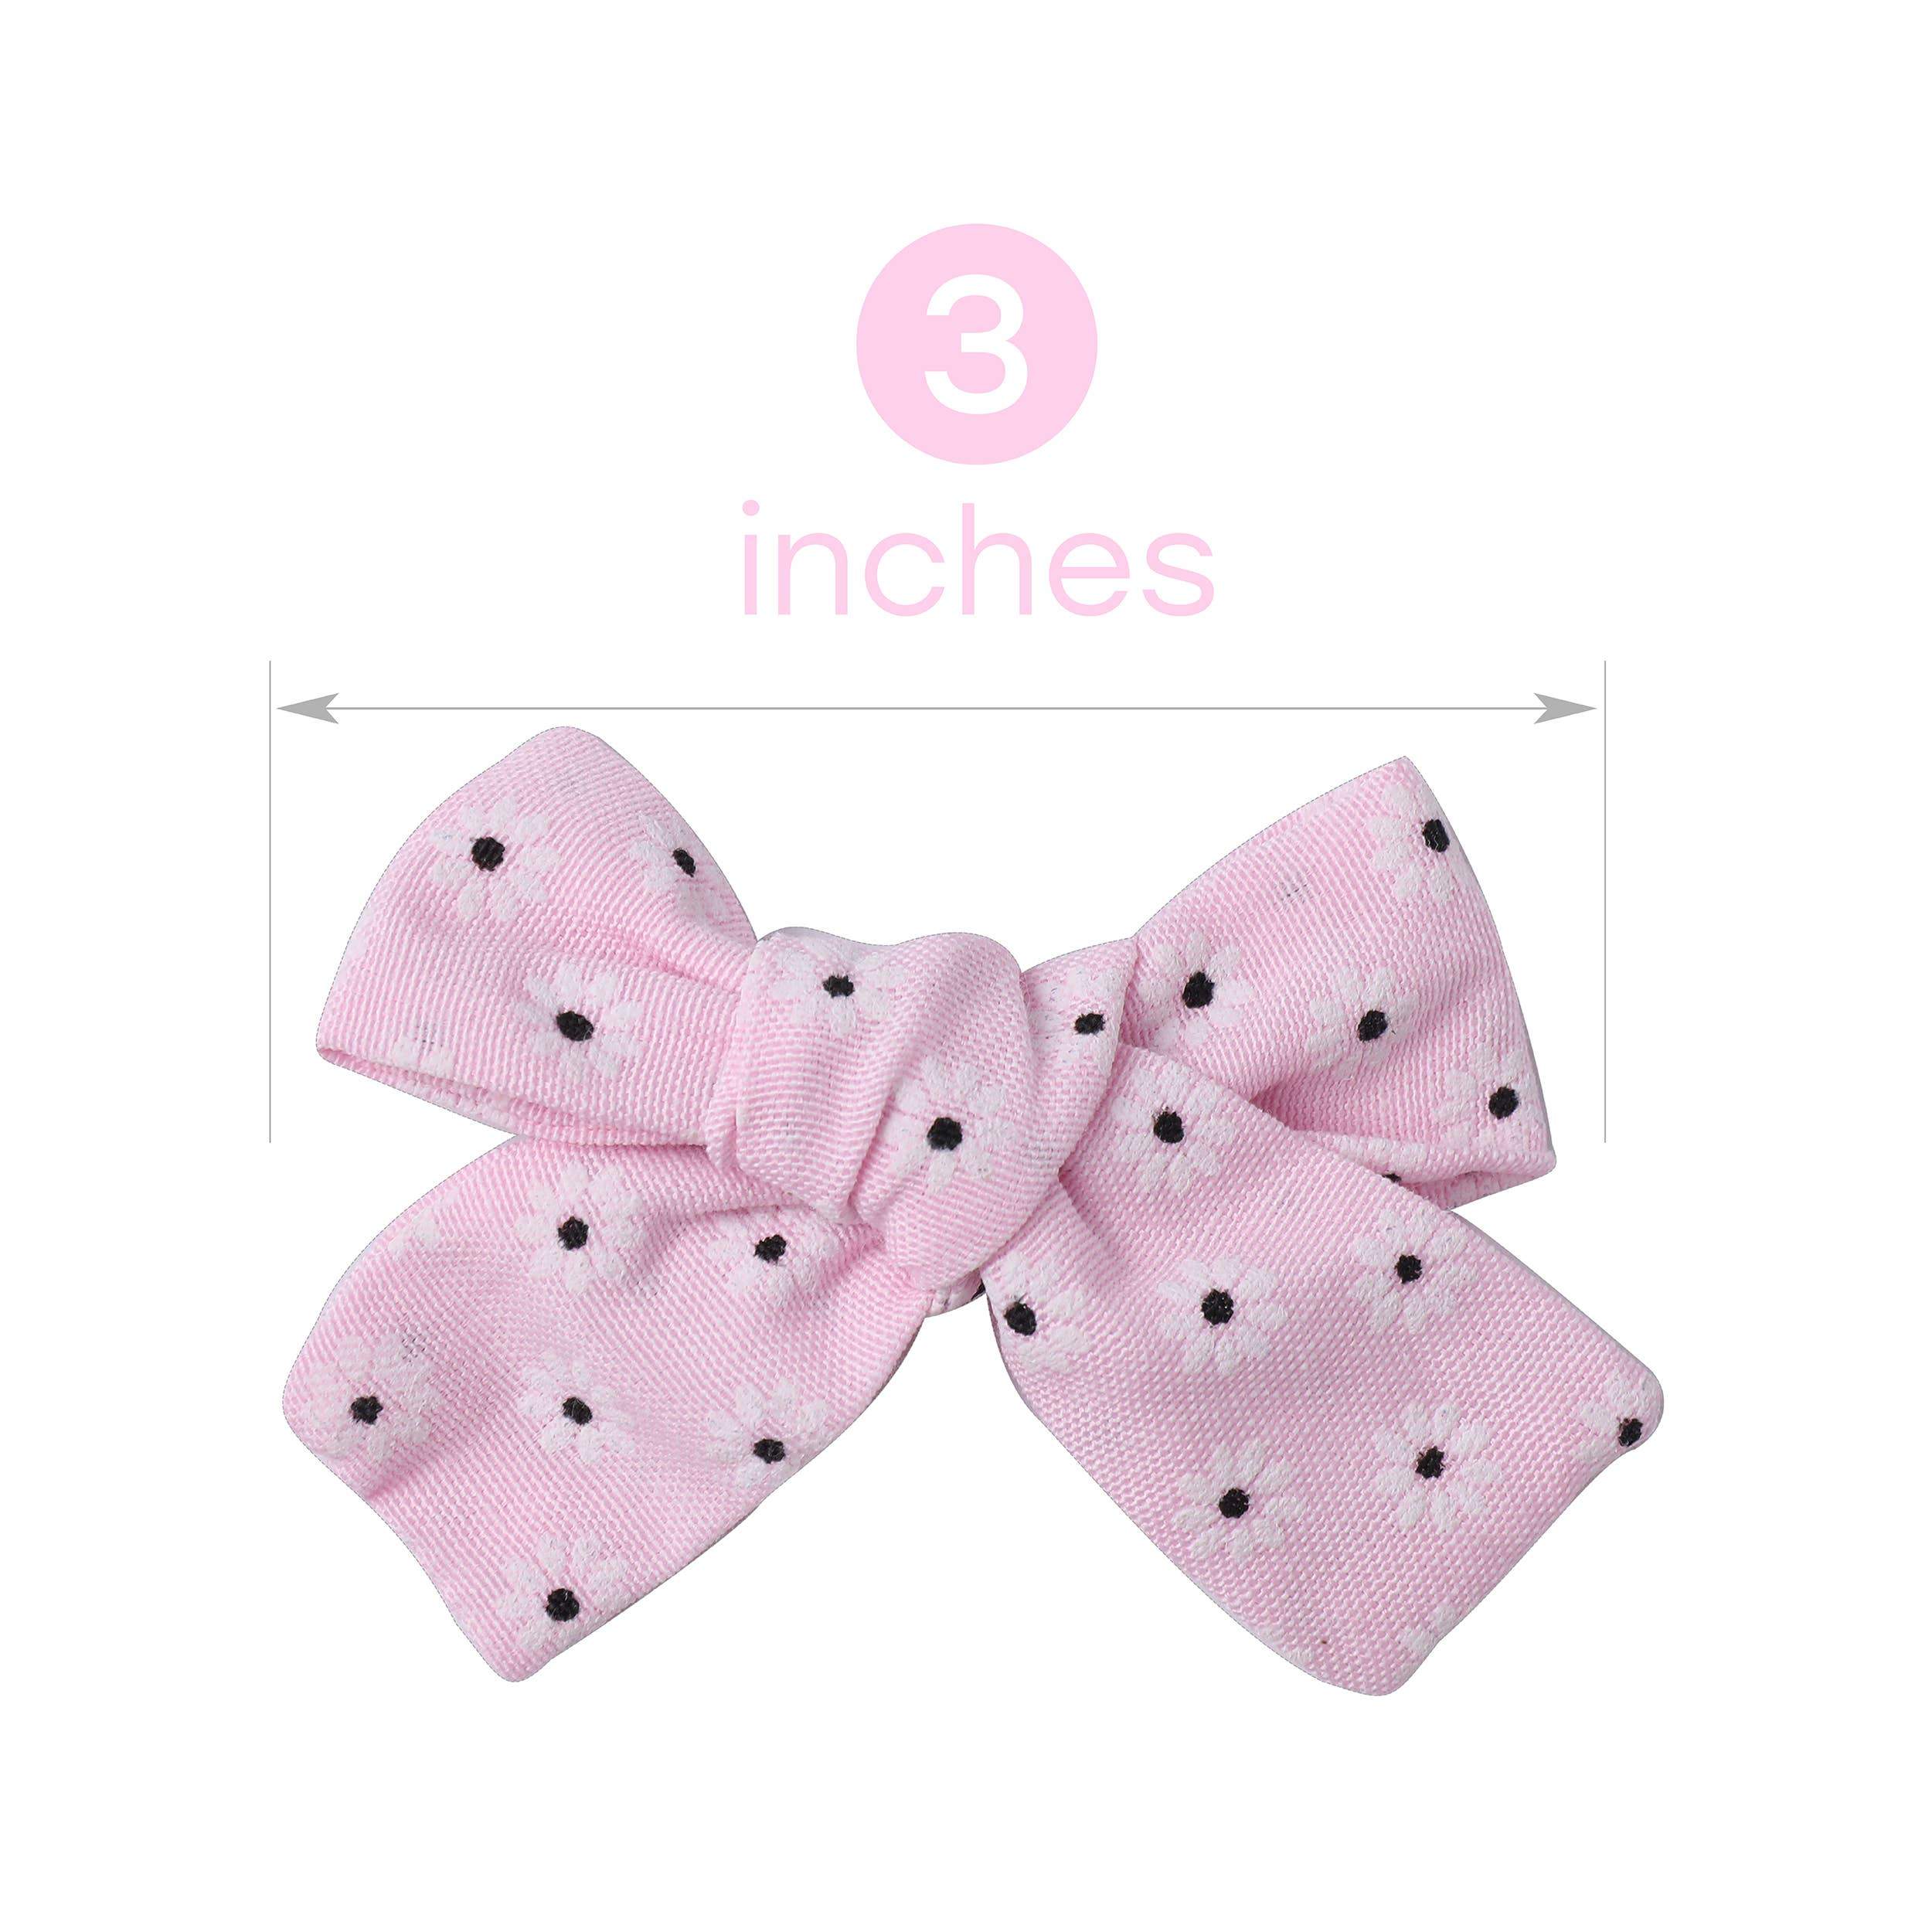 Toddler Pink Hair Bow Headbands for Girls, Pink Bows for Teen